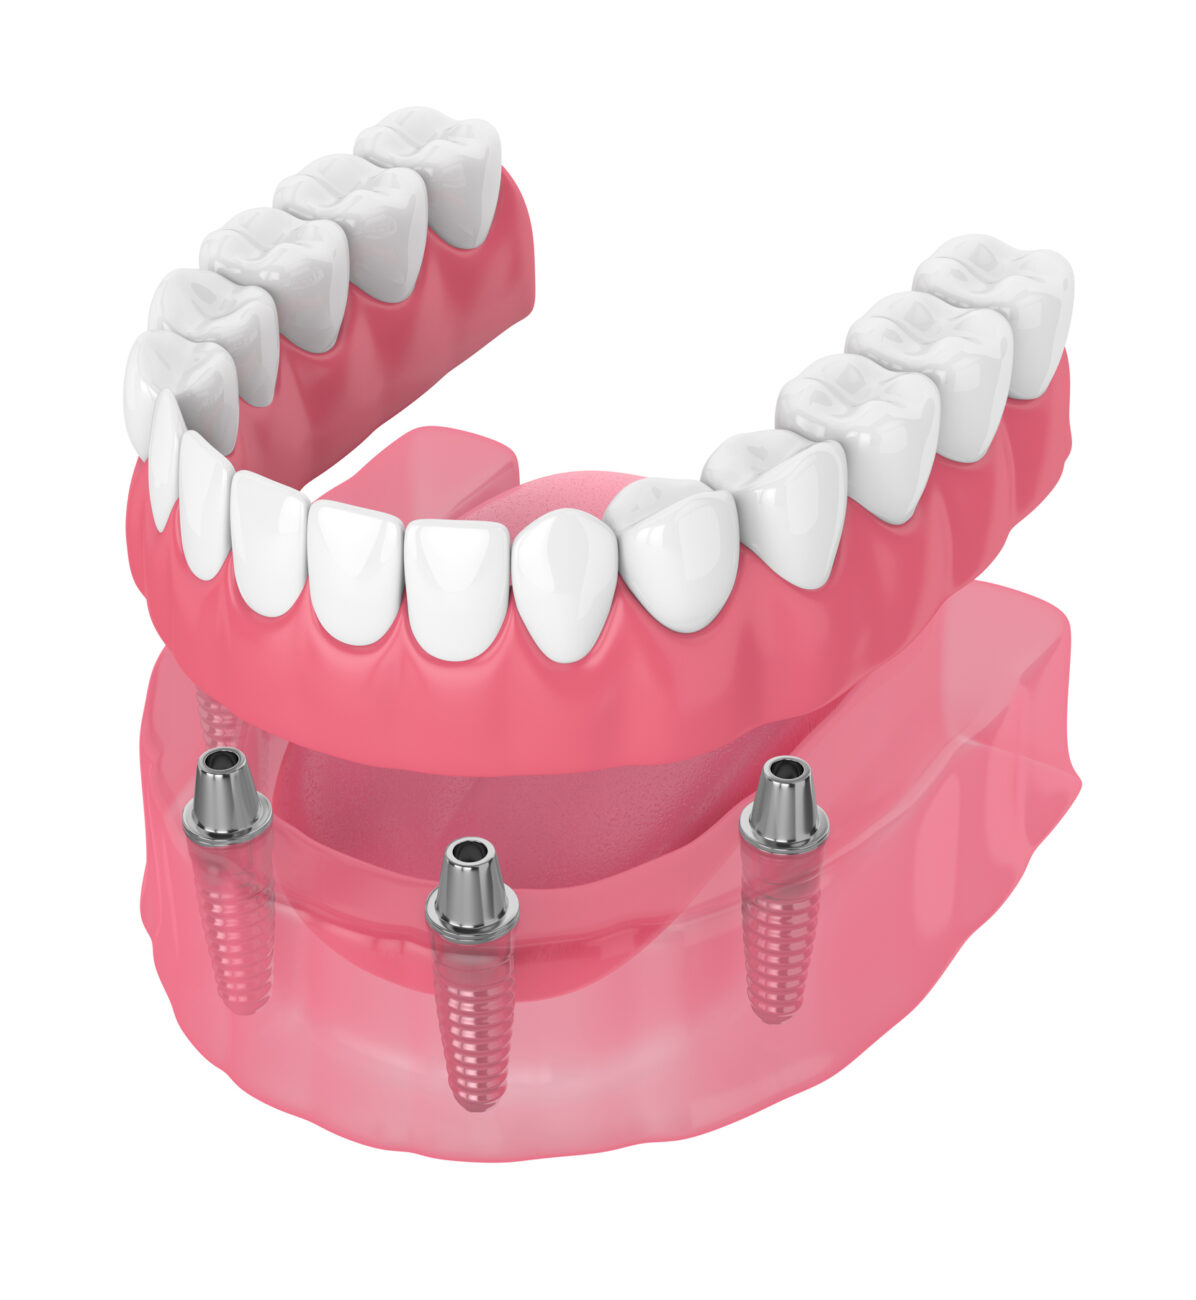 A Denture in Broomall PA may be able to restore your bite after tooth loss